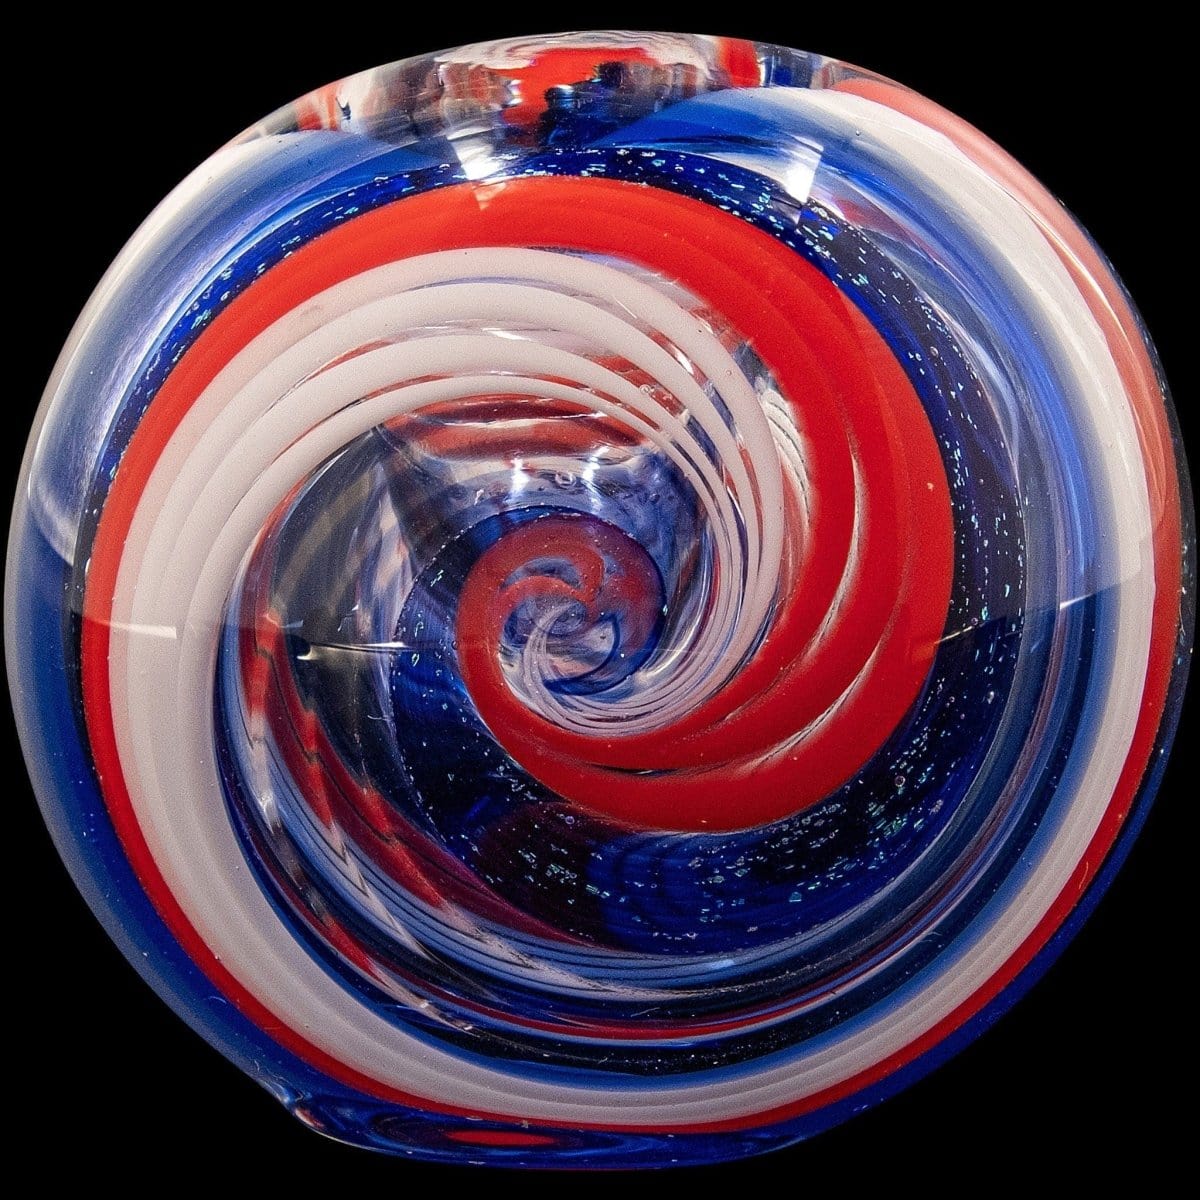 LA Pipes Hand Pipe "Stars and Stripes" Glass Spoon Pipe